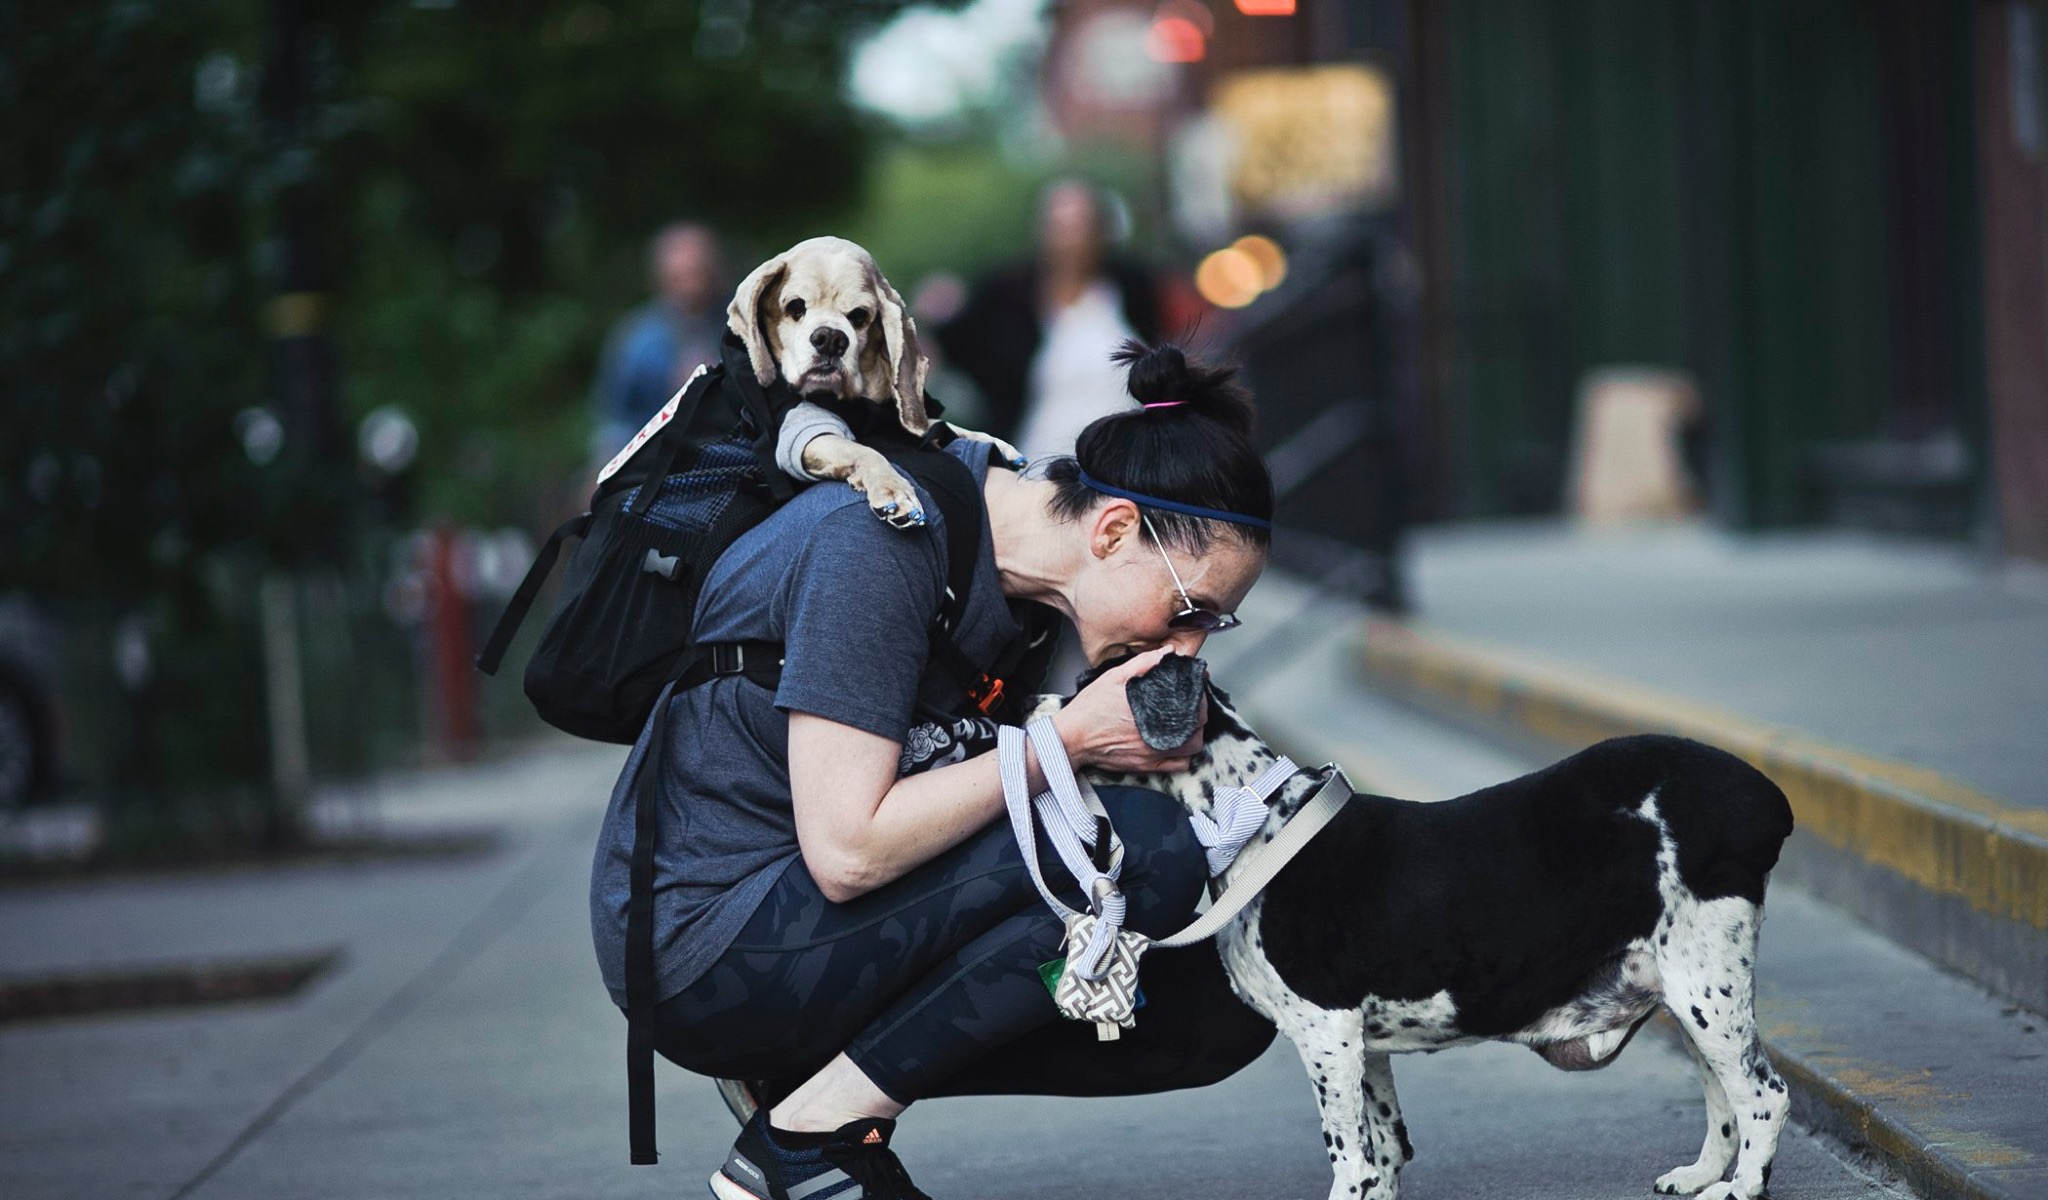 A woman shows affection toward her two dogs on a city street